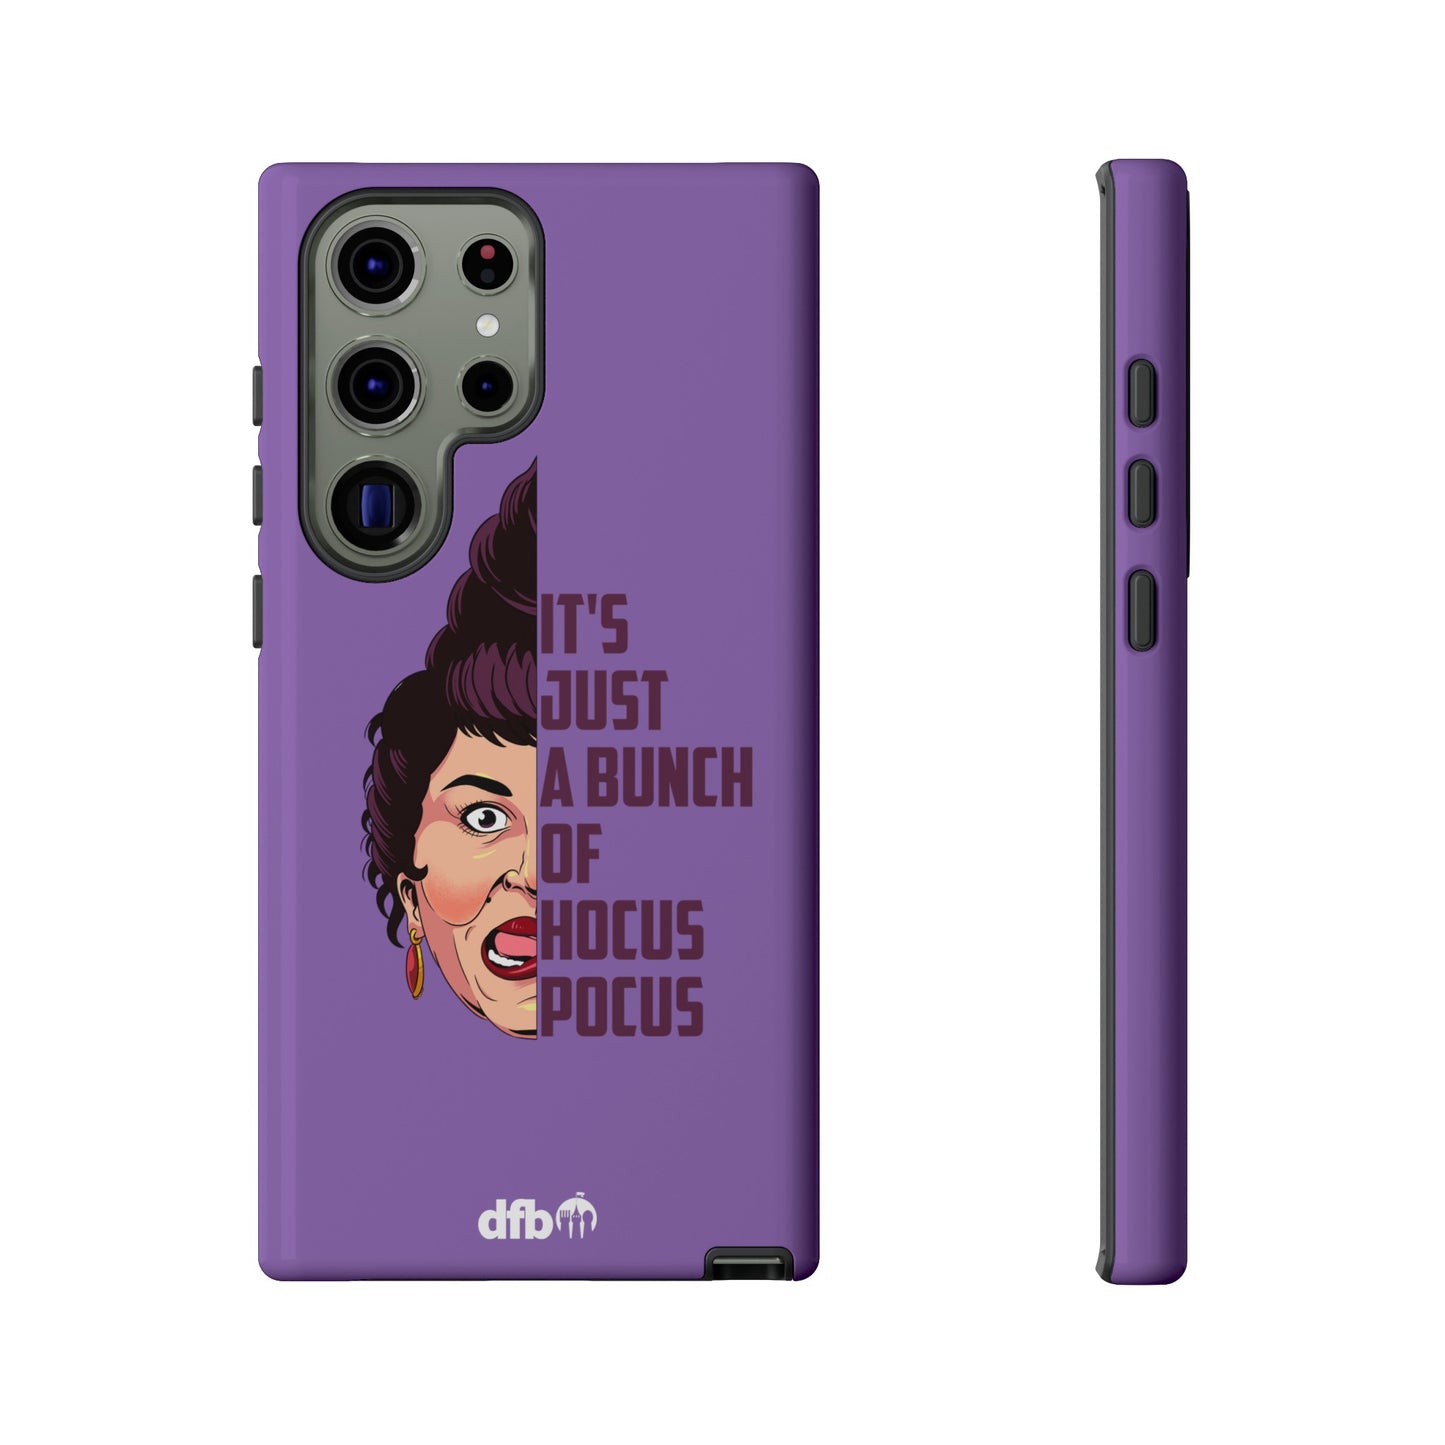 It's Just a Bunch of Hocus Pocus Mary Sanderson Sisters - Samsung Galaxy & Google Pixel Phone Case